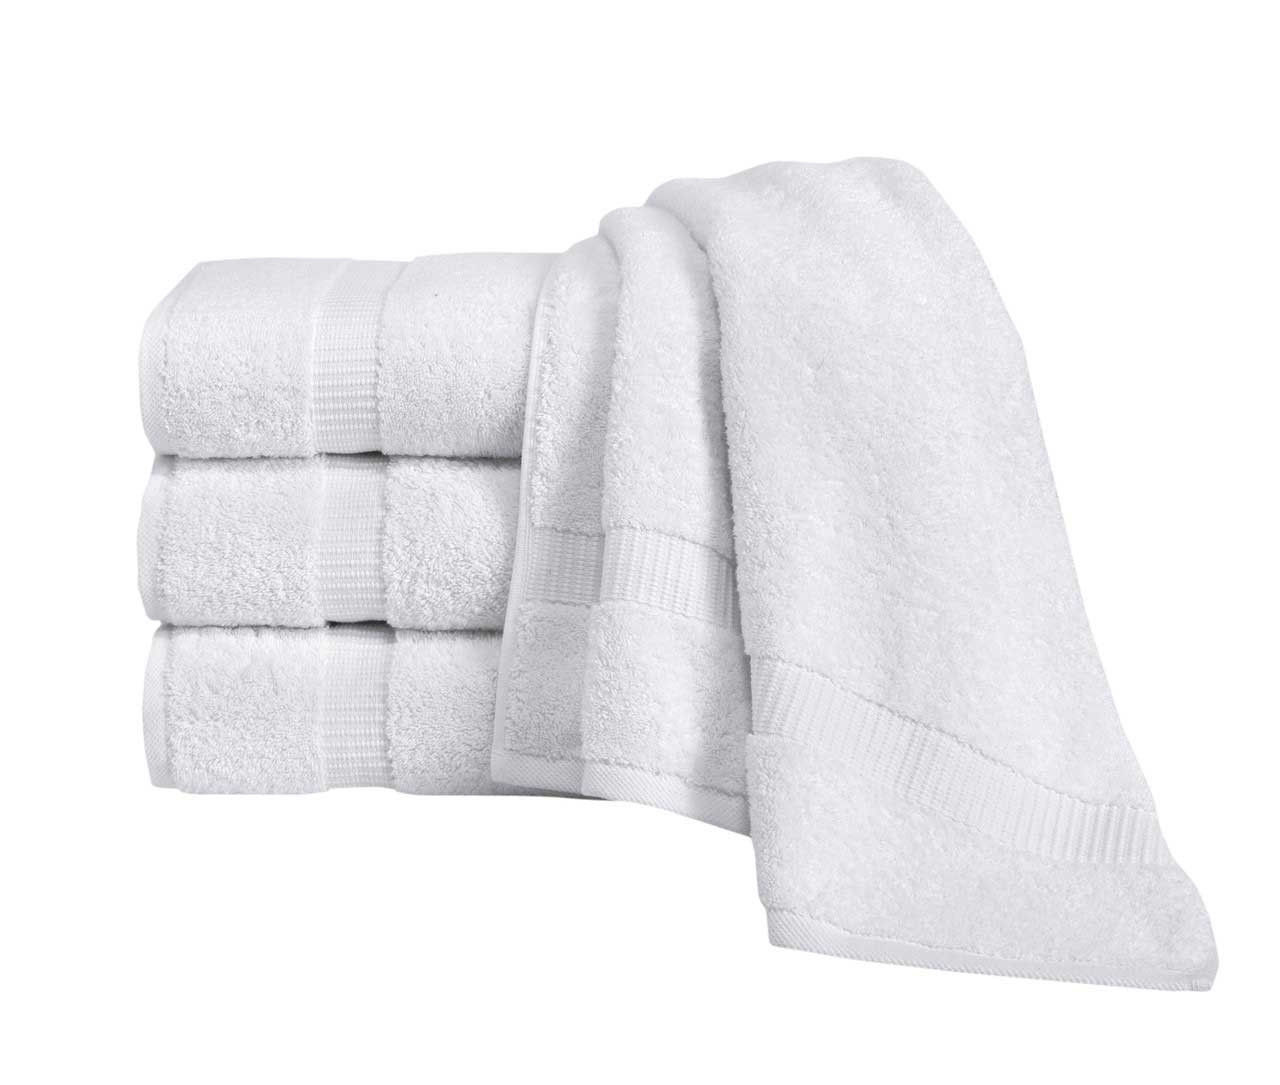 Royal Turkish White Towels Villa Collection Questions & Answers